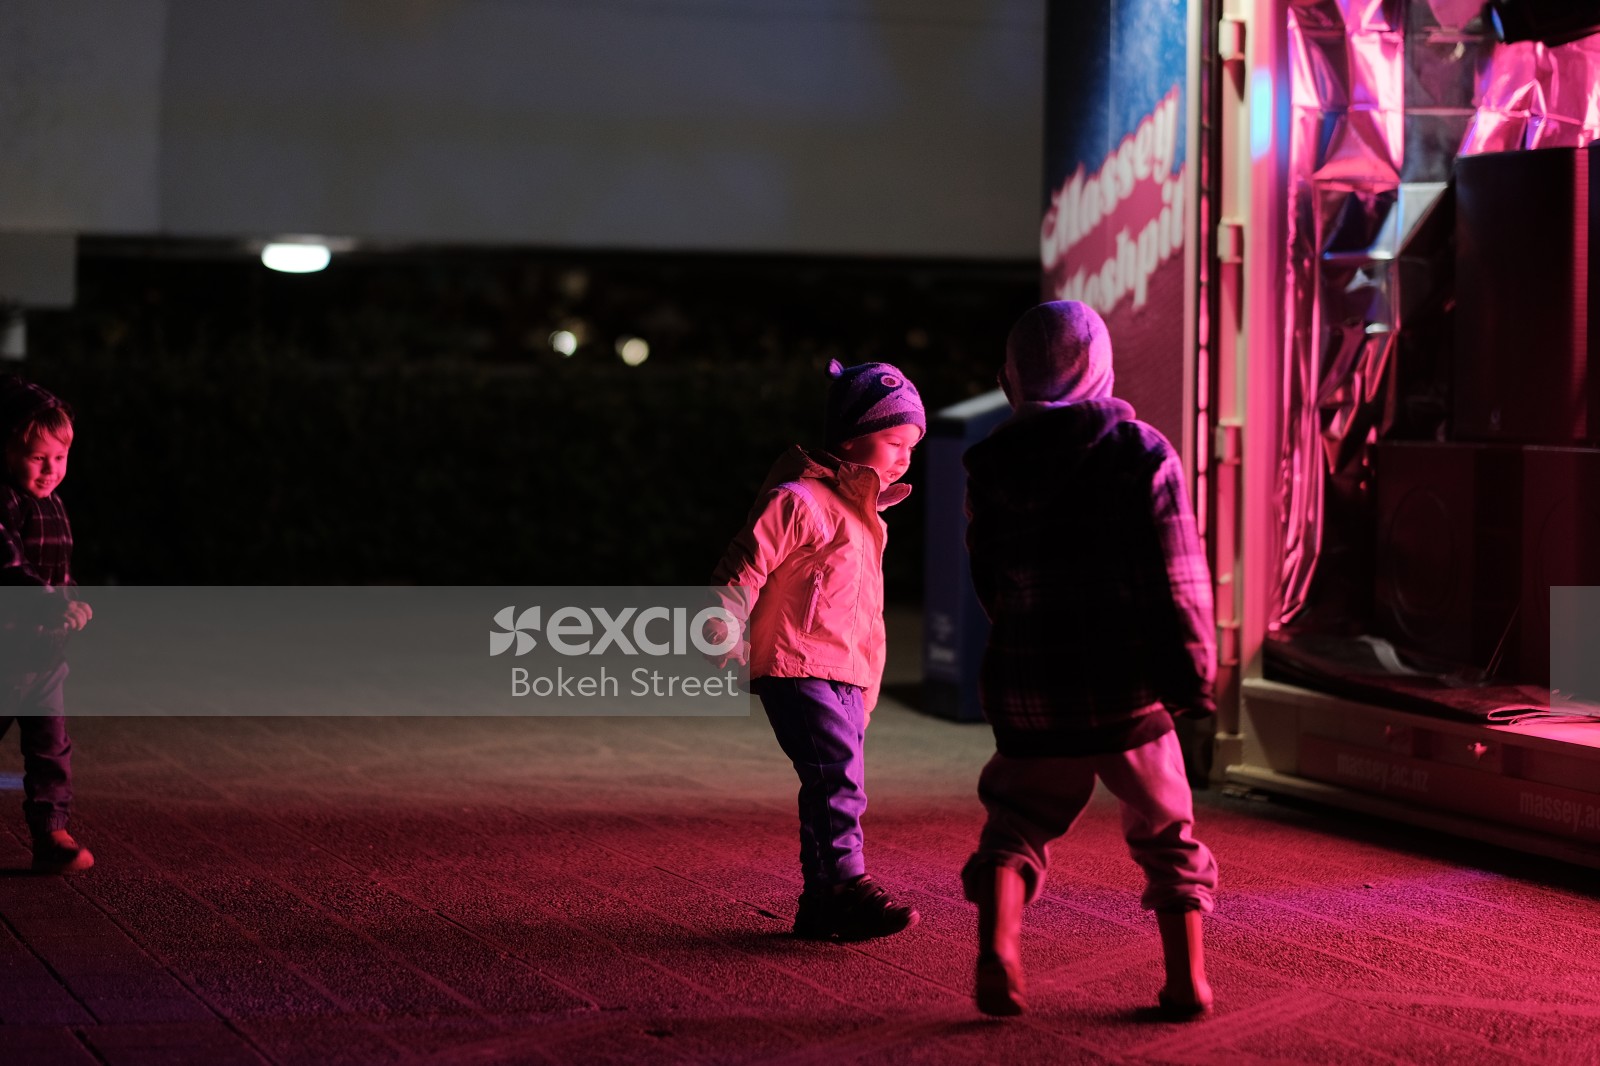 Children playing in pink light on pavement